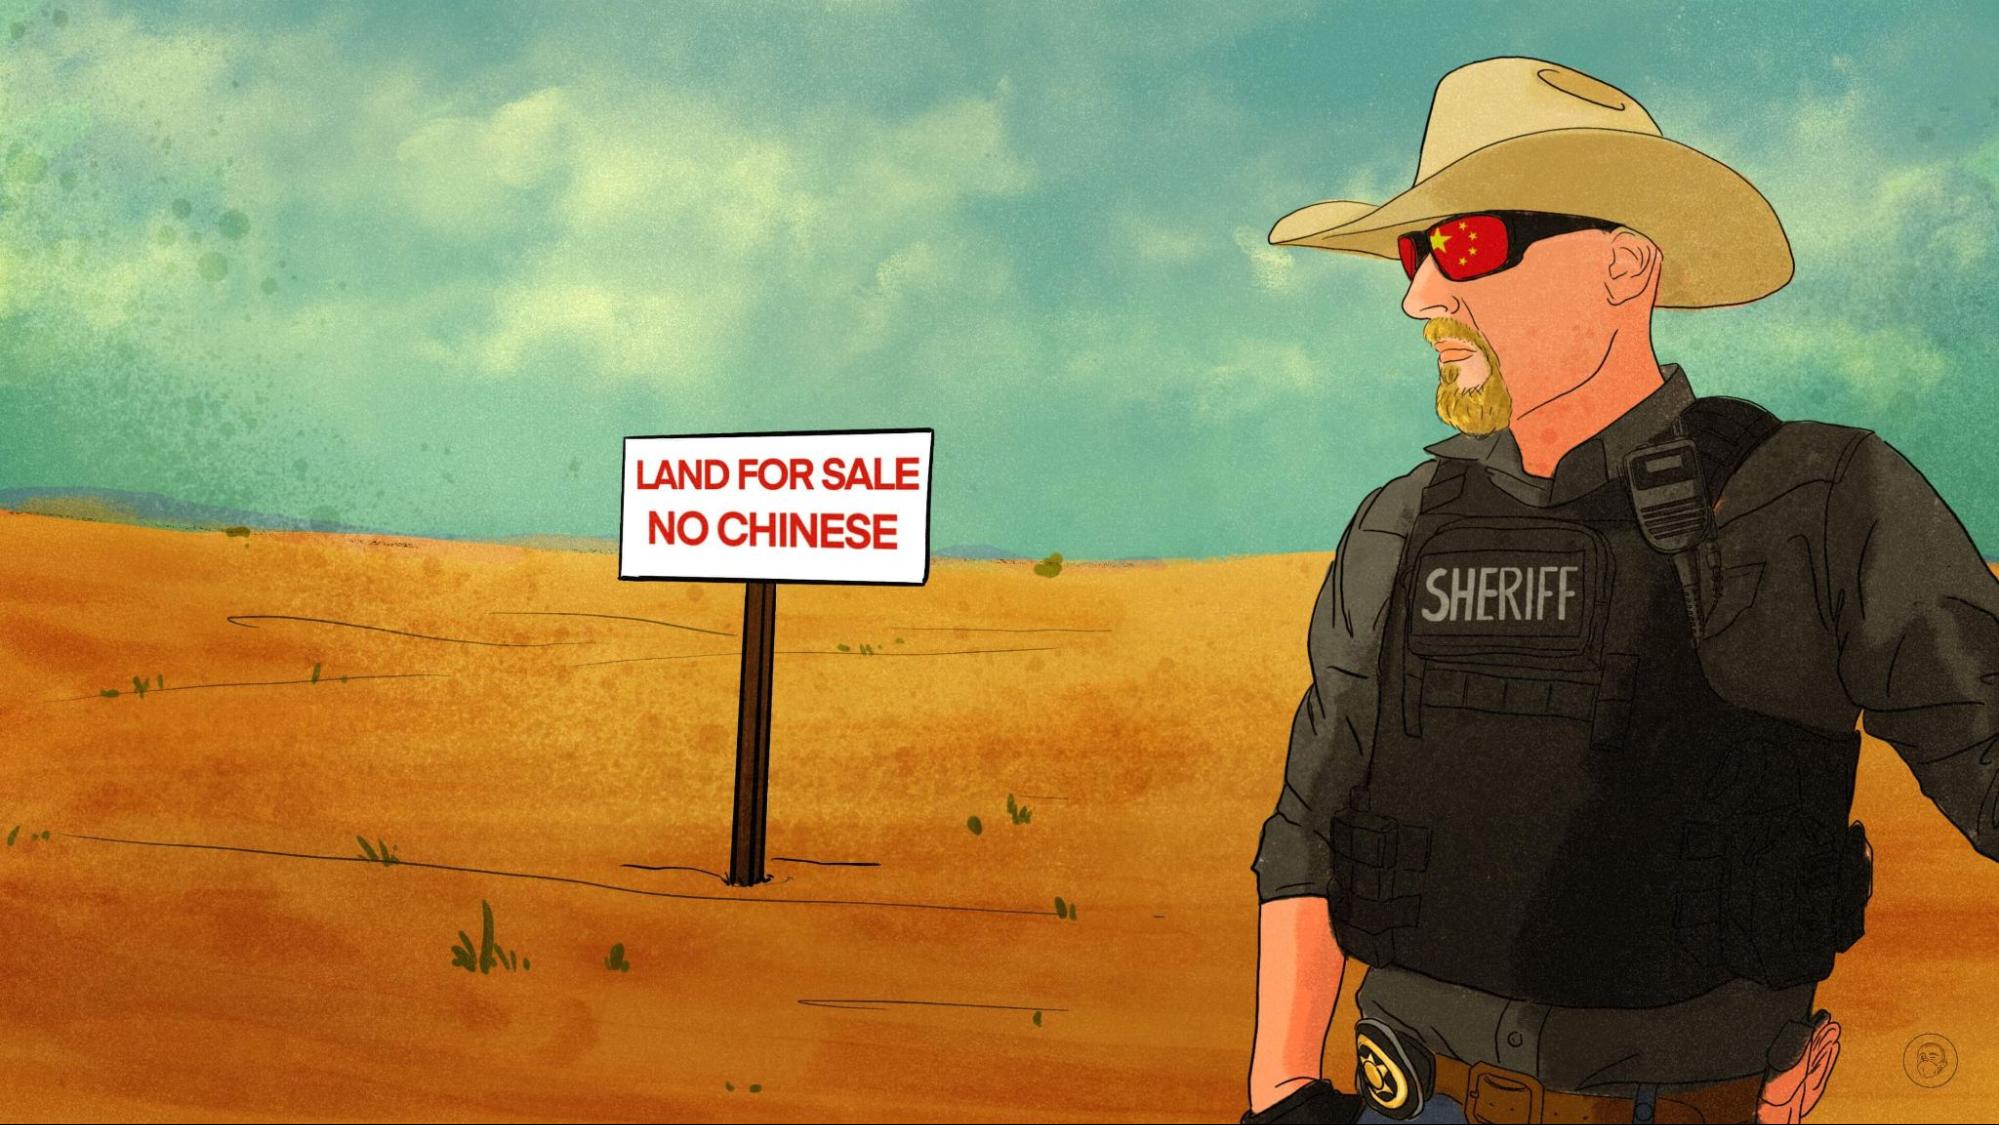 China-owned companies reckon with U.S. state, national land purchase bans –  The China Project